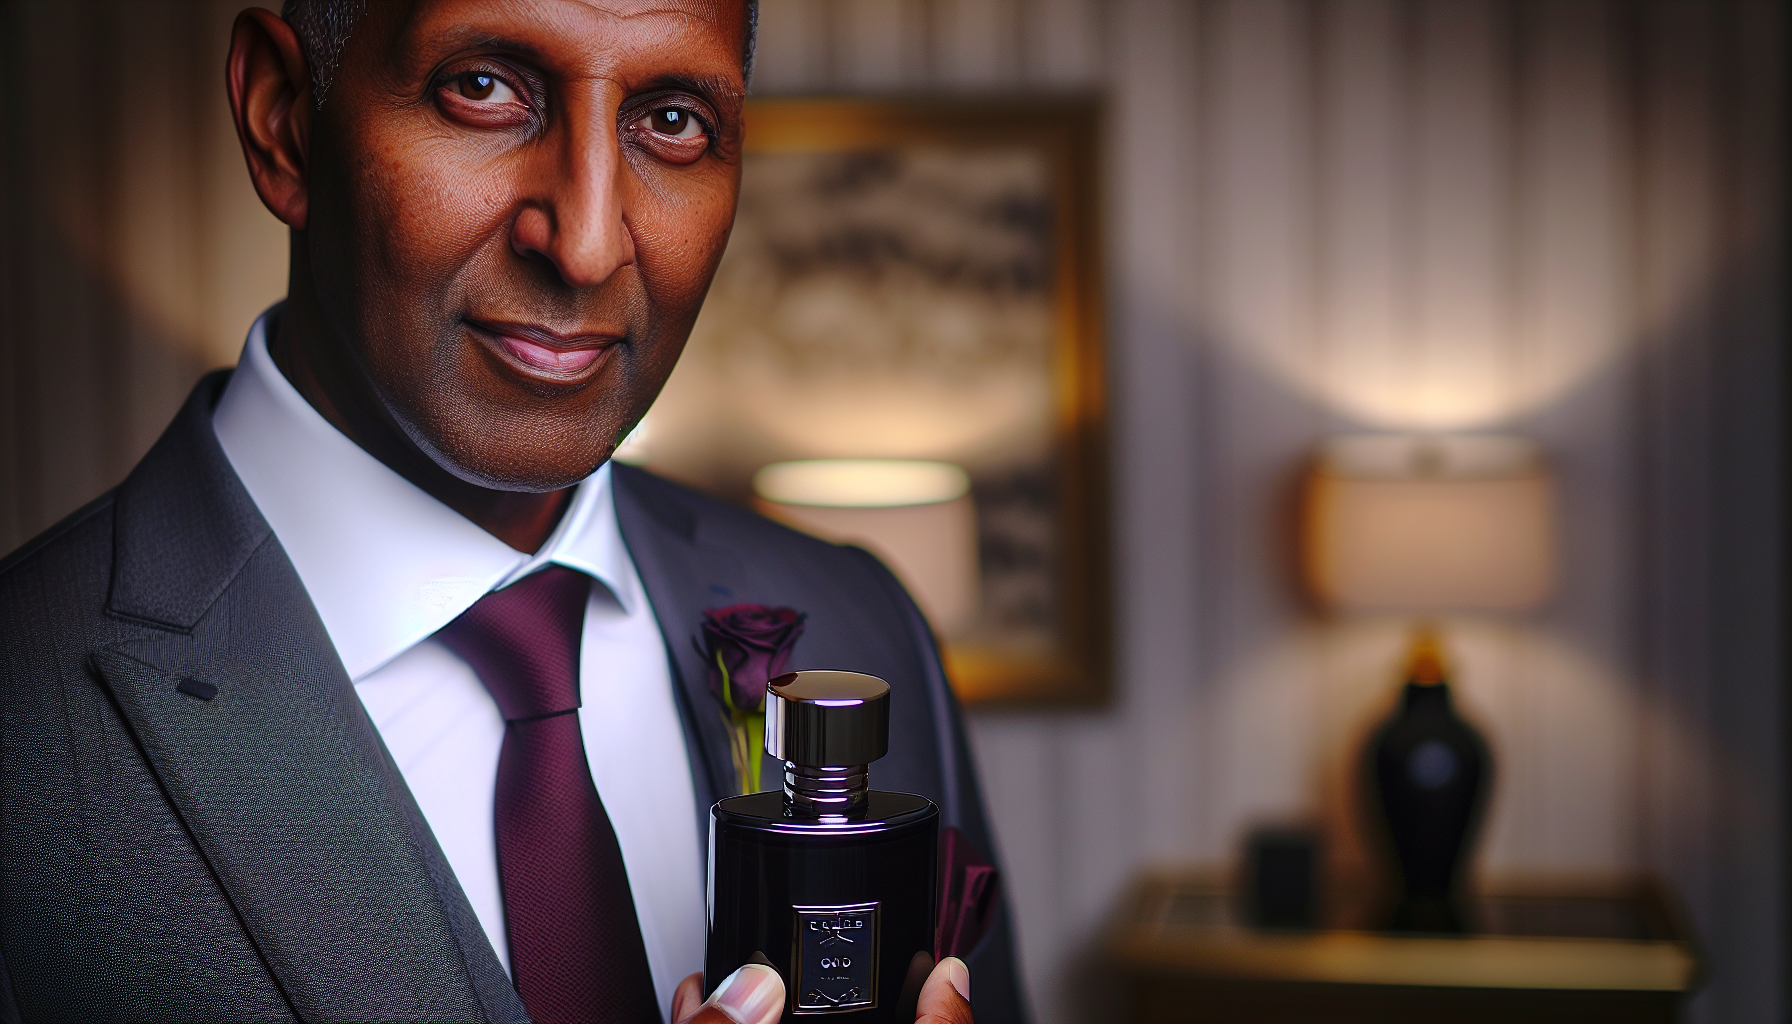 A person wearing a sophisticated attire holding a bottle of Creed Royal Oud